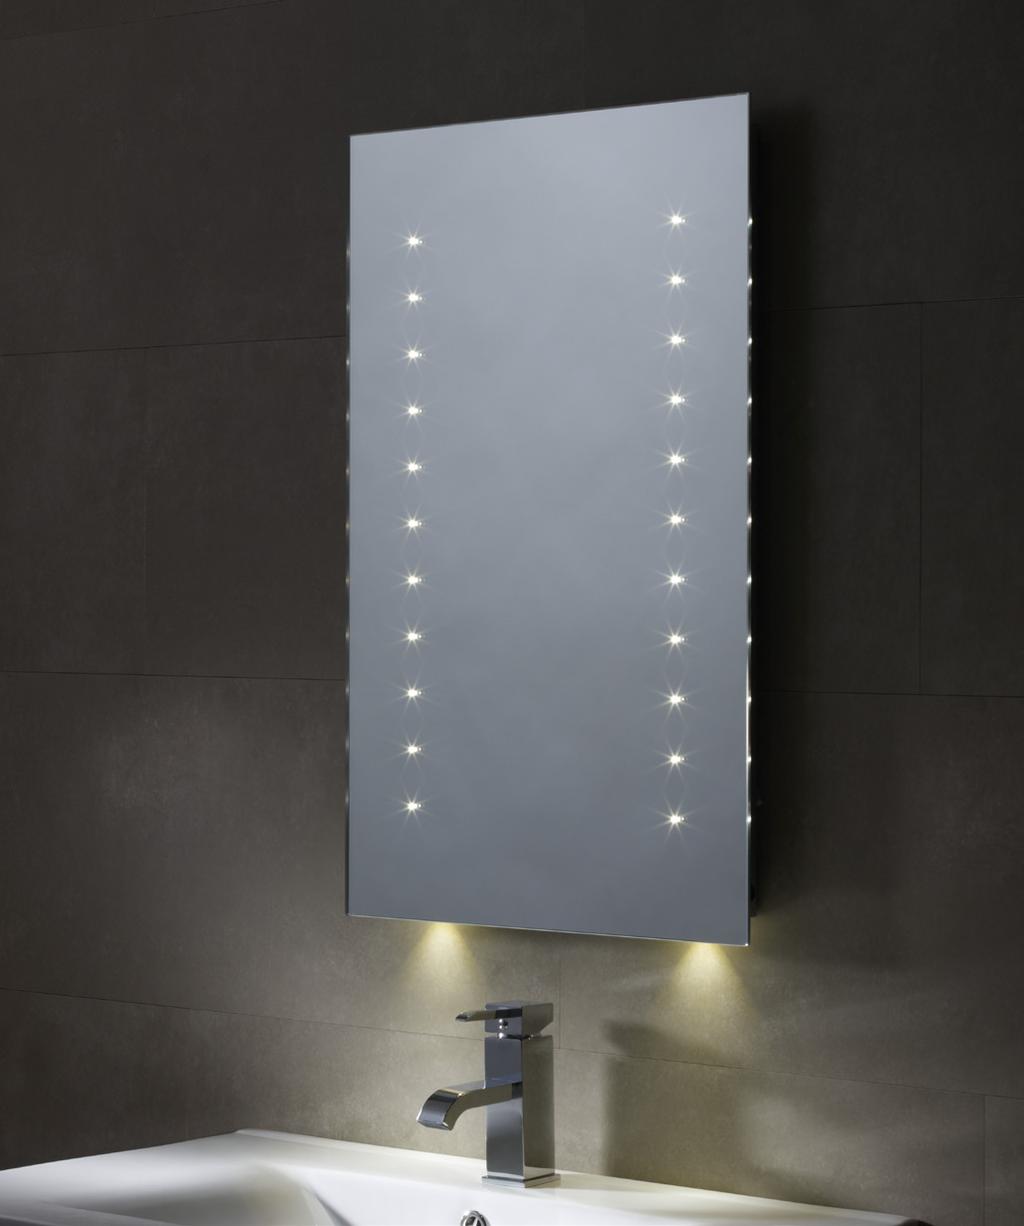 ILLUMINATED MIRRORS Refraction LED Illuminated Mirror 530(w) x 730(h) x 40(d)mm Features: Ambient lighting, Heated demister pad, Infrared sensor, IP44, Can be hung portrait